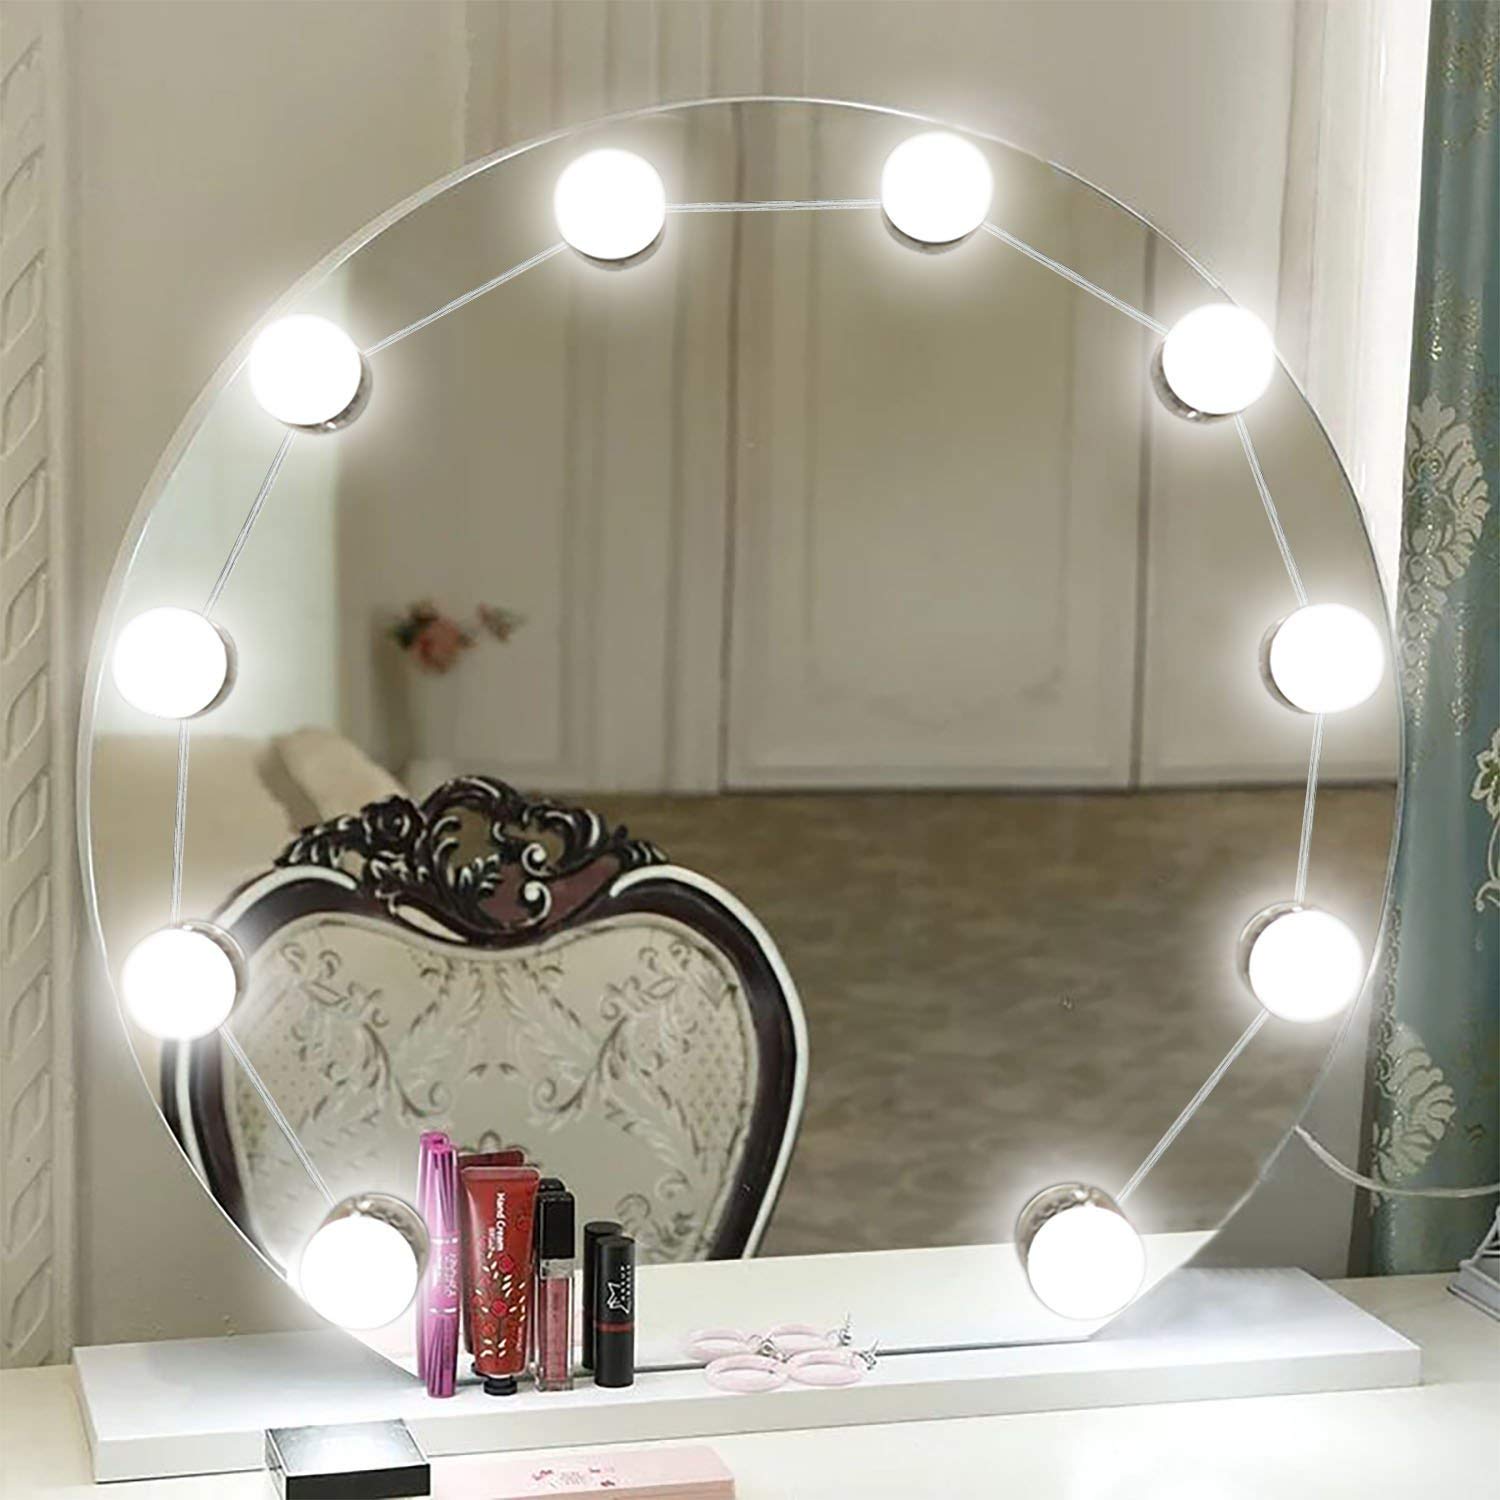 KMASHI Vanity Mirror Lights, LED Makeup Vanity Light Kit with 10 Cosmetic  Dressing Bulb Hollywood Style, USB Power Supply 7000K Dimmable Lighting